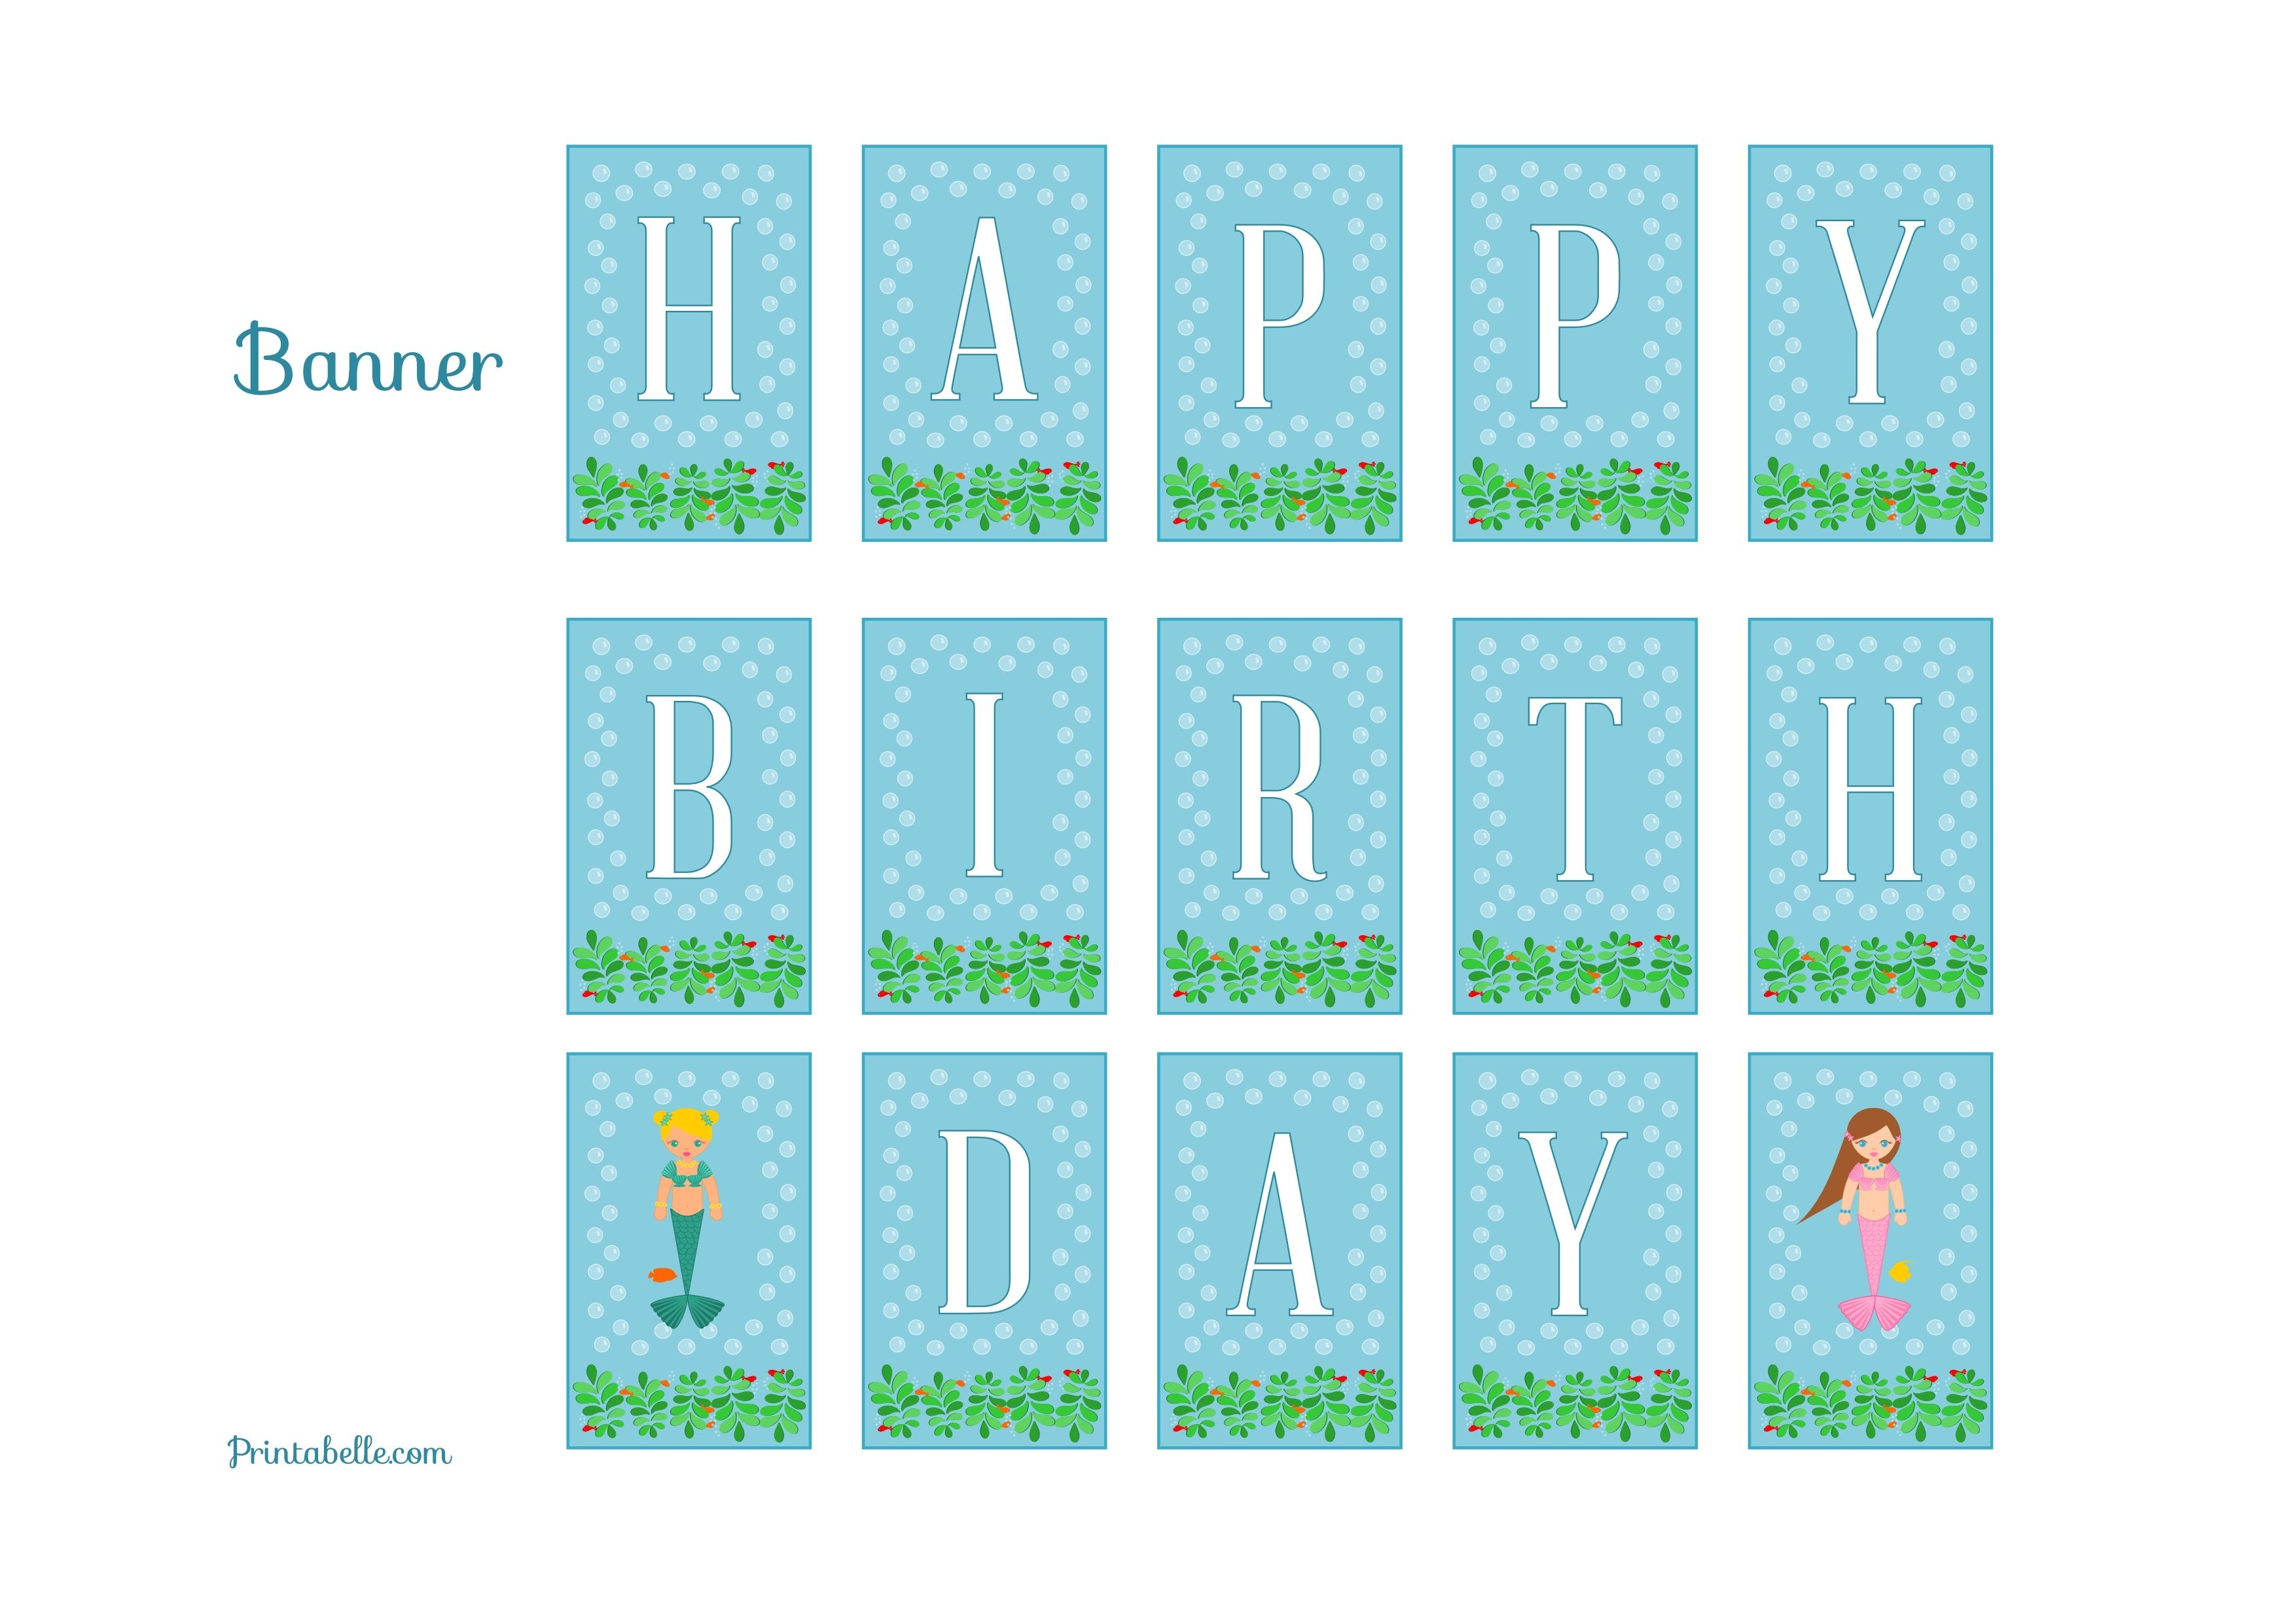 Free Mermaid Birthday Party Printables From Printabelle | Mermaid - Free Printable Little Mermaid Birthday Banner